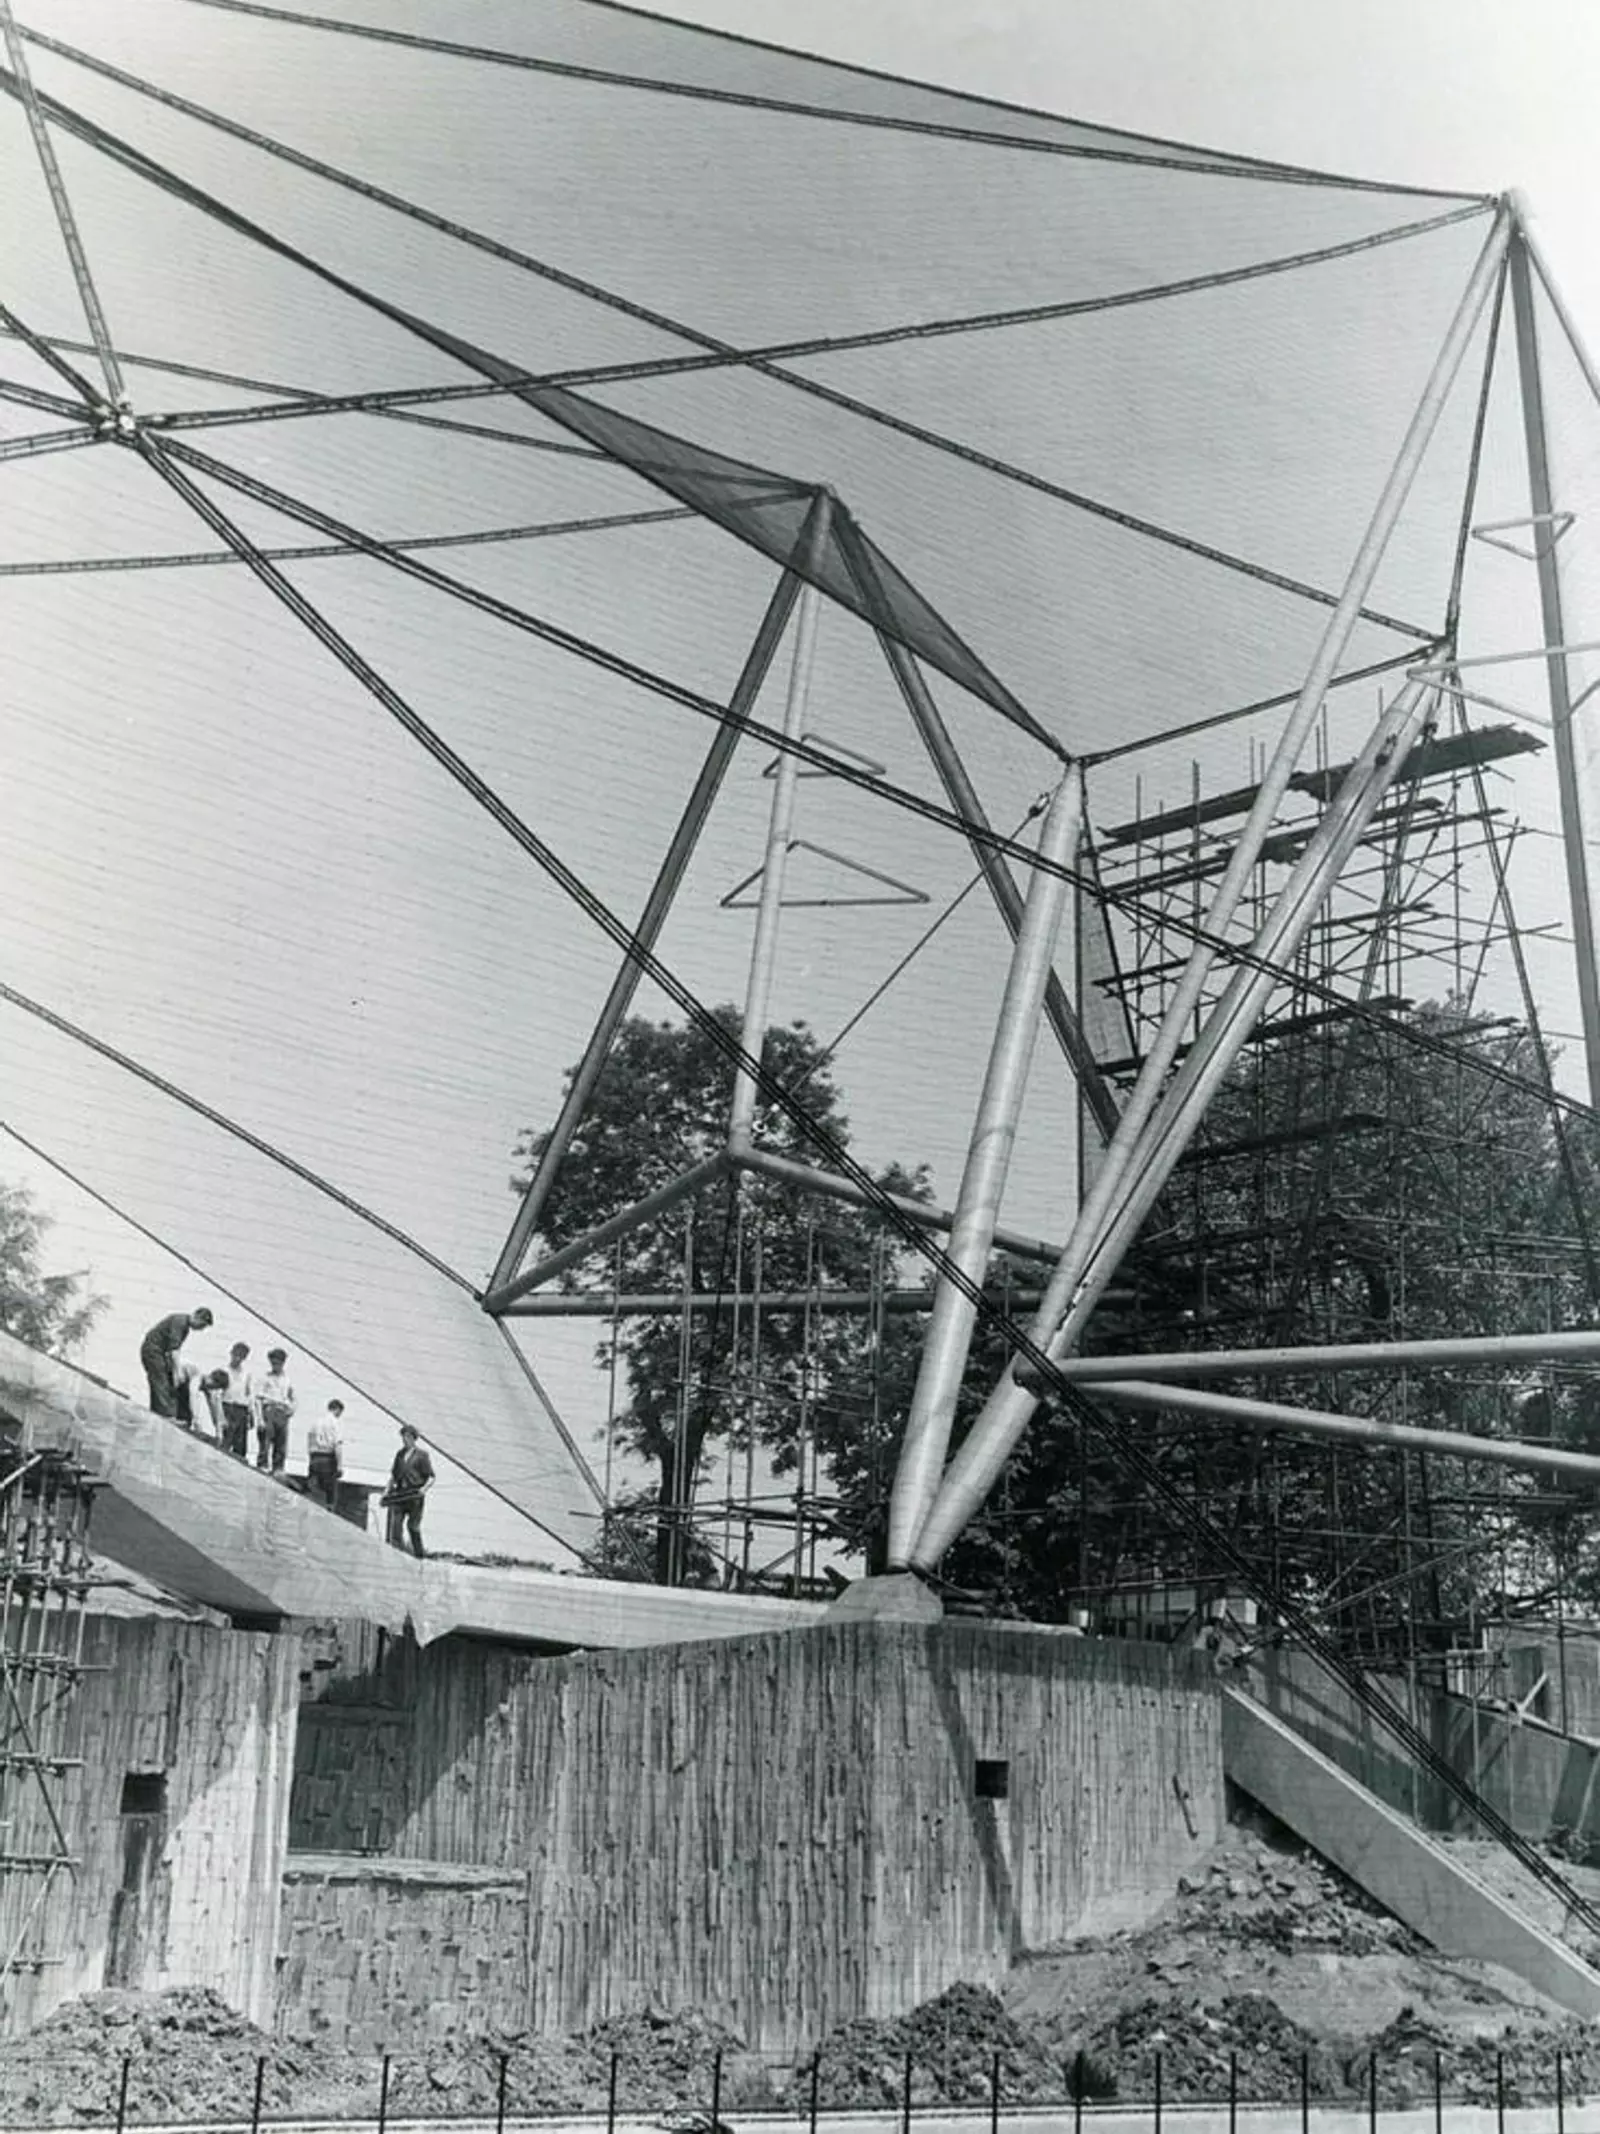 The Snowdon Aviary under construction in the summer of 1964.